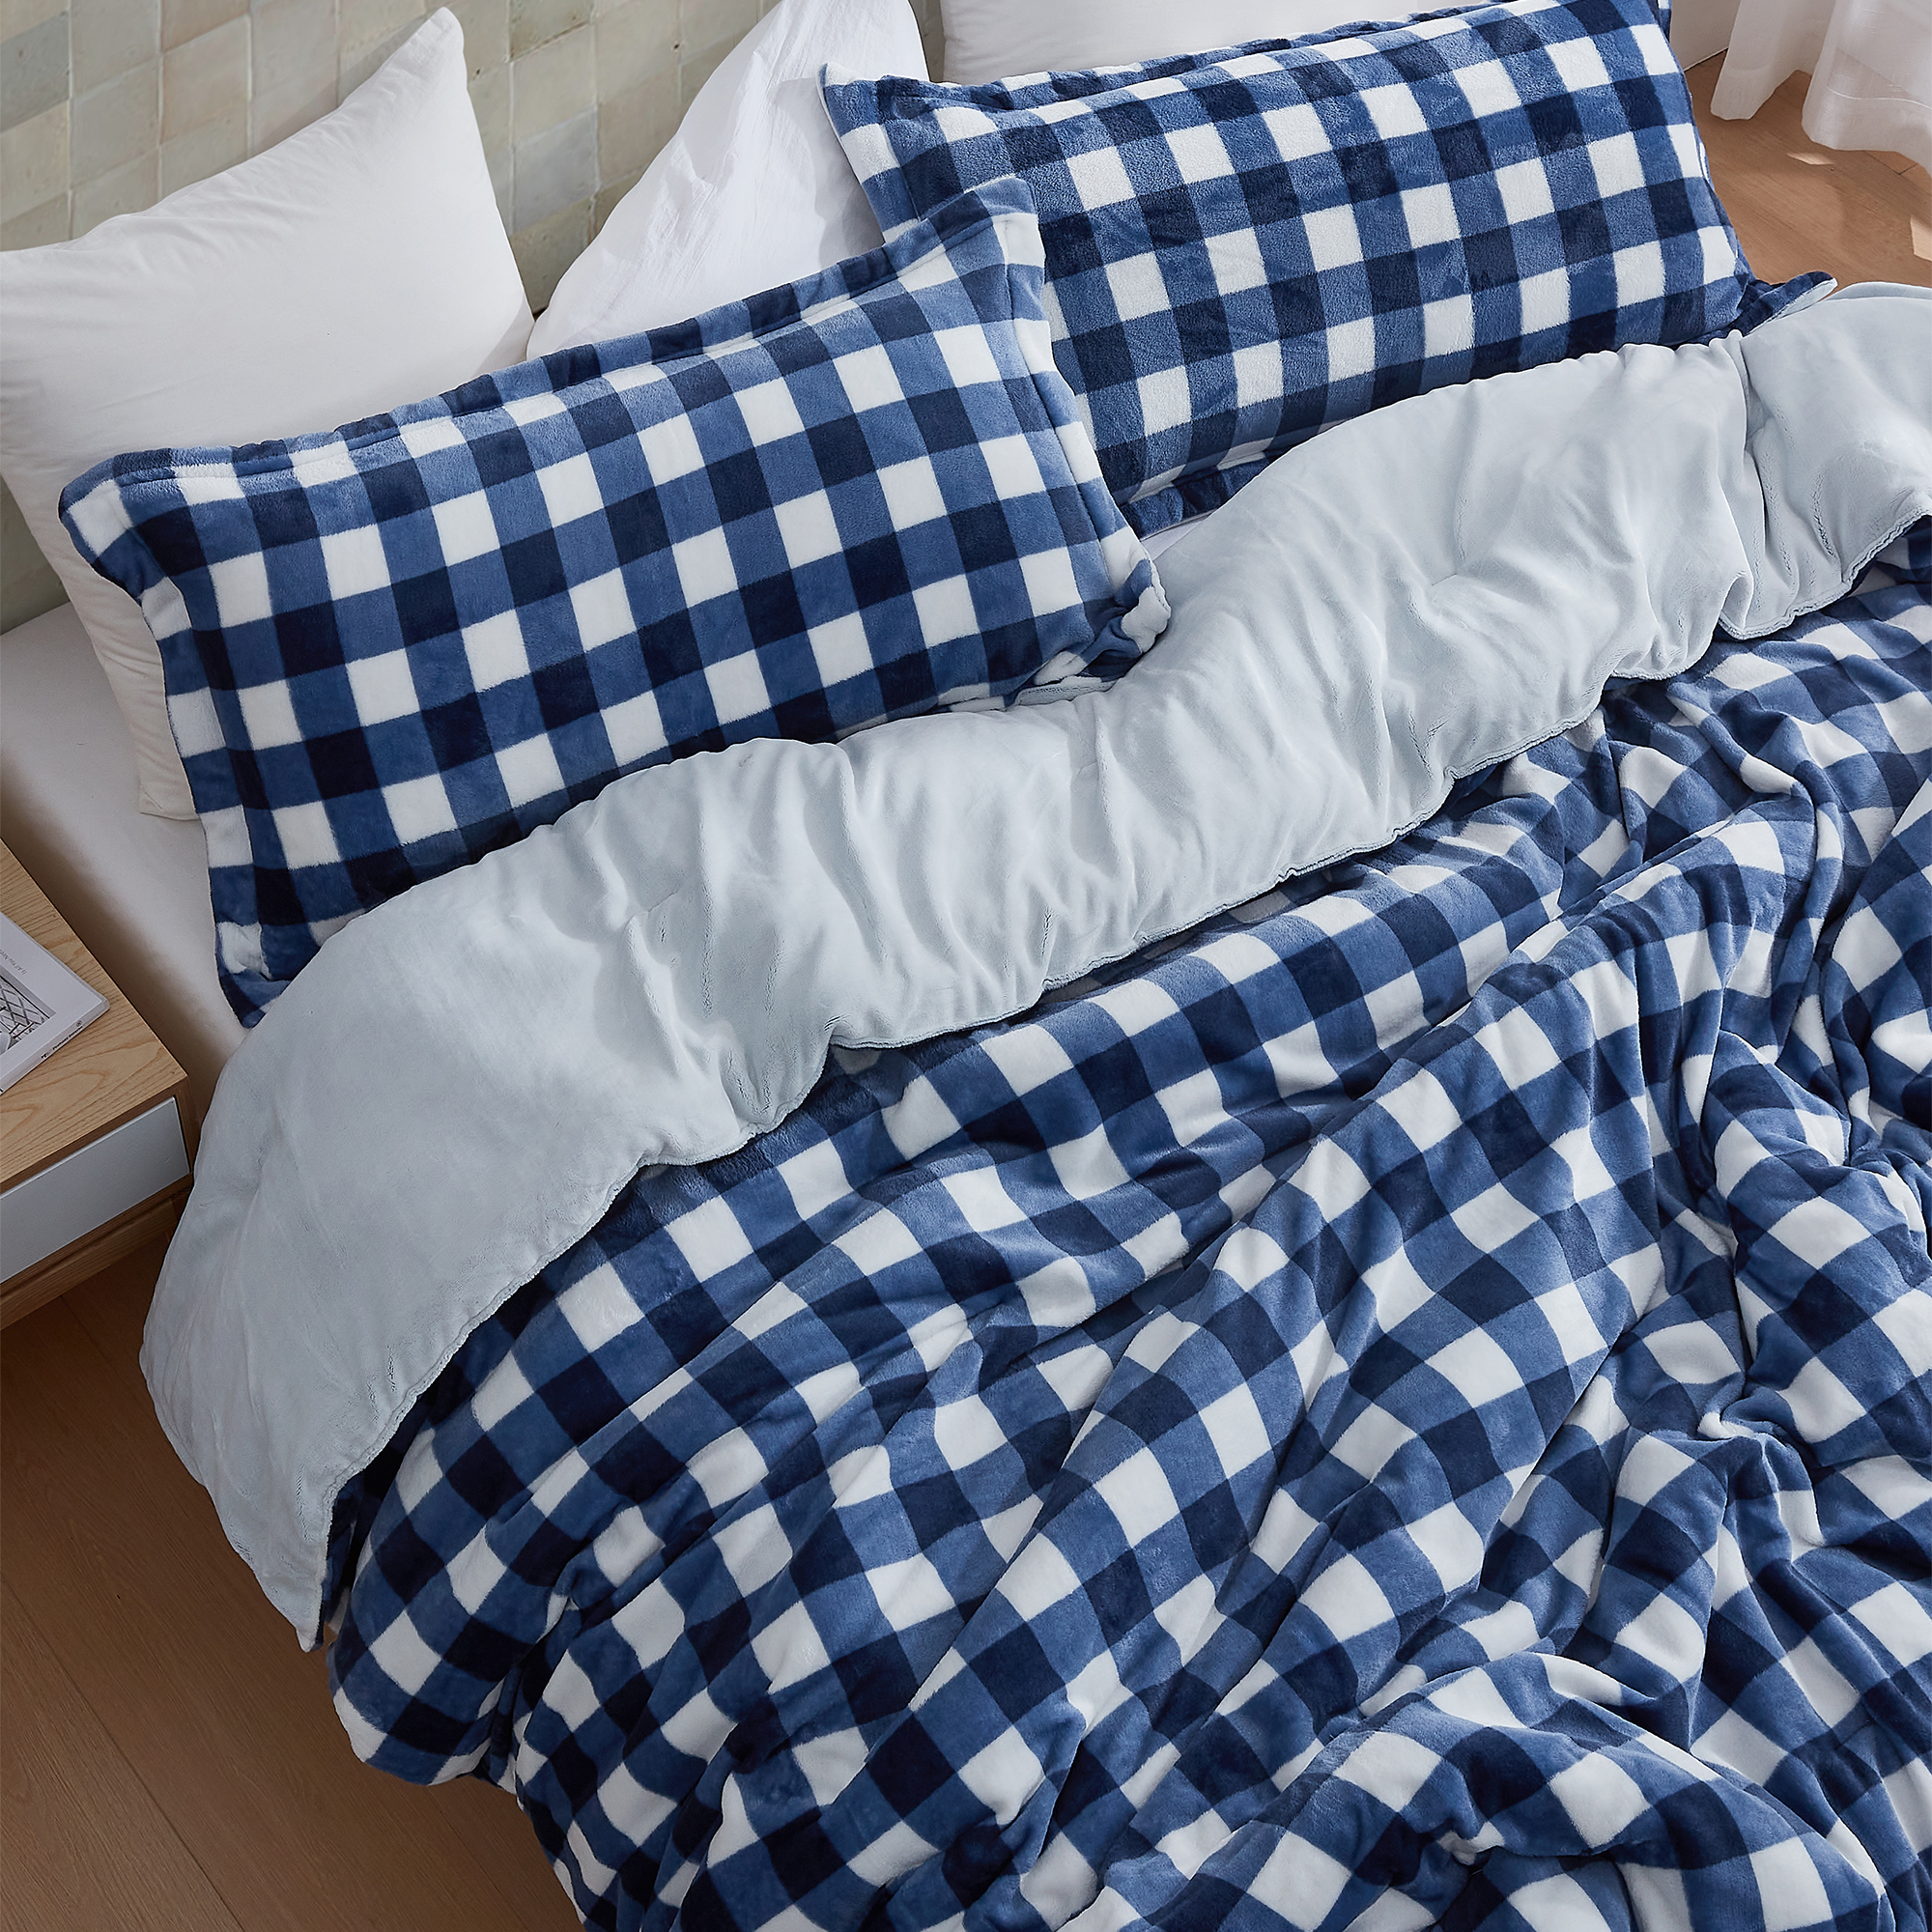 Ah, Yes The Scottish Winter - Coma Inducer Oversized Comforter - Blue Checkered Plaid